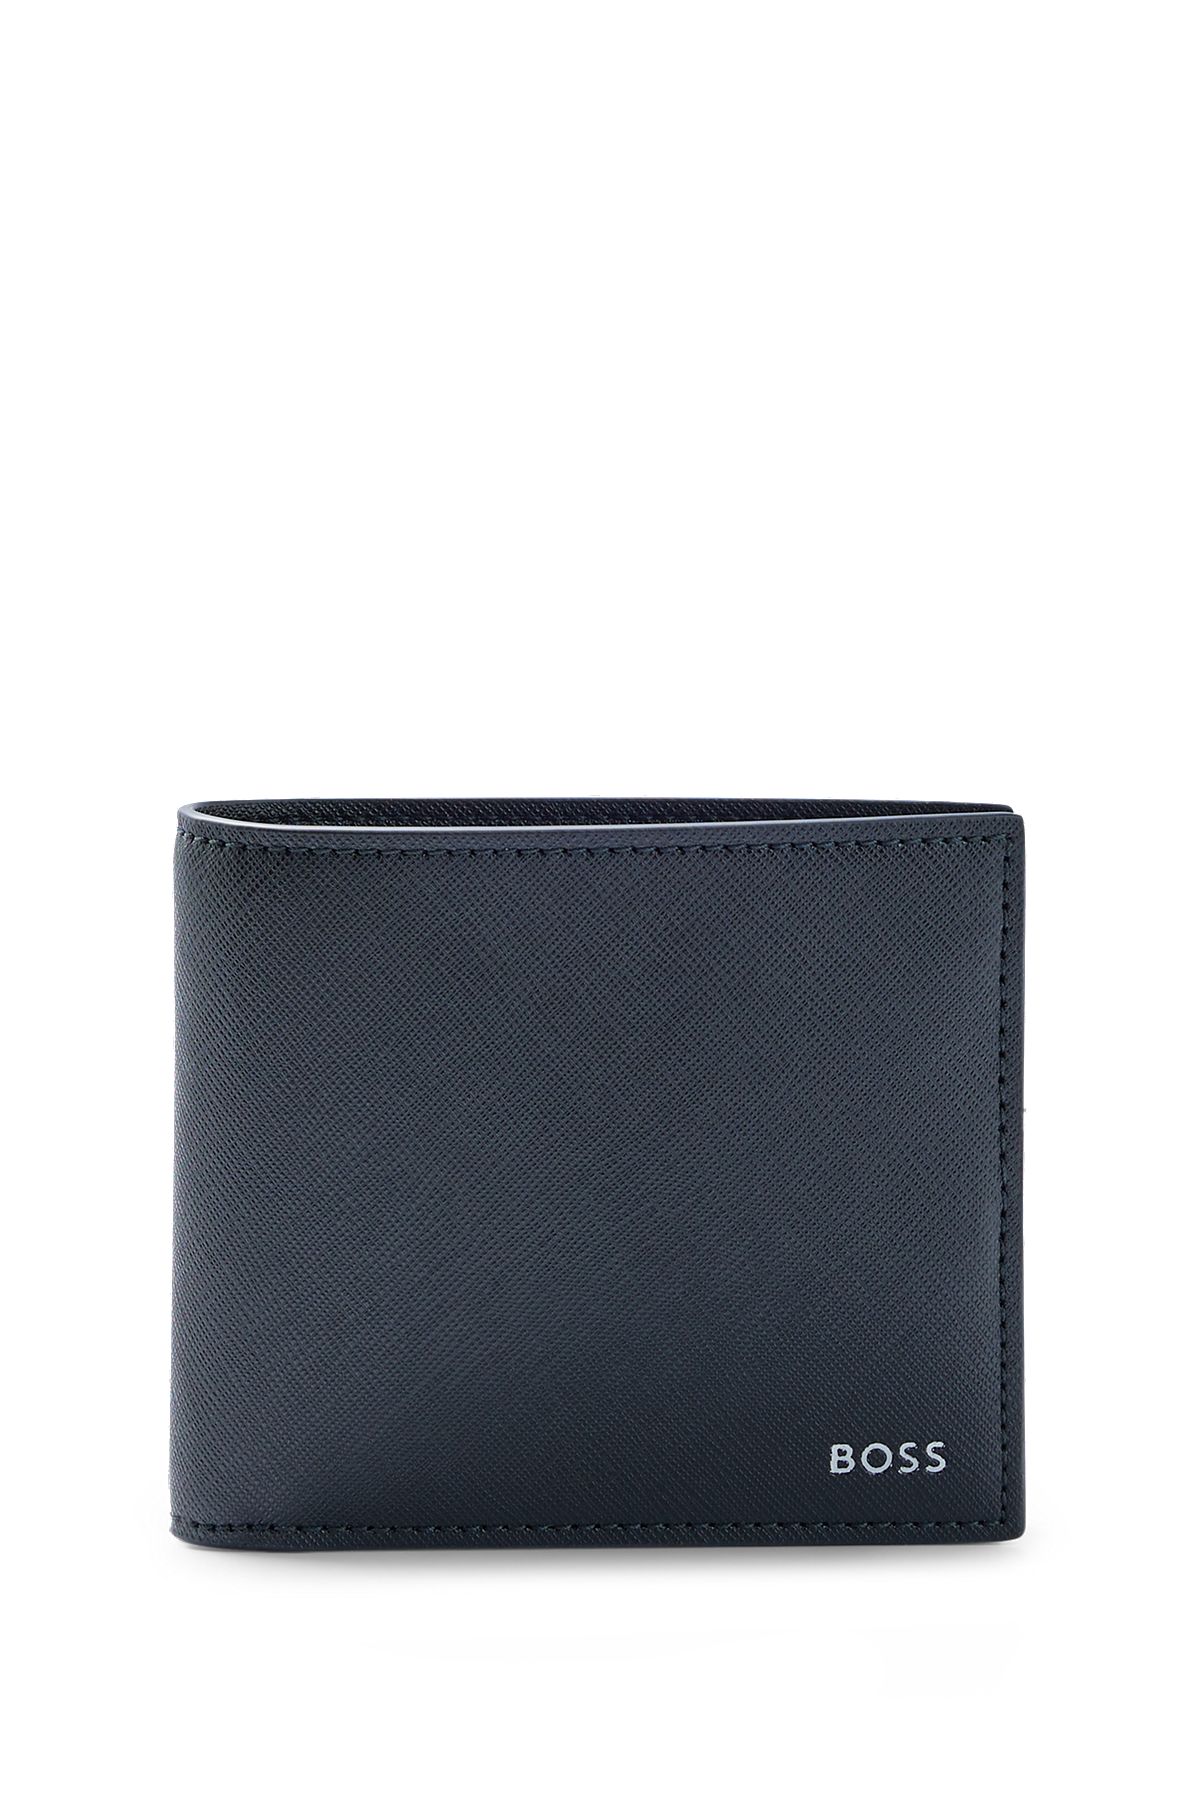 Structured wallet with signature stripe and logo detail, Black